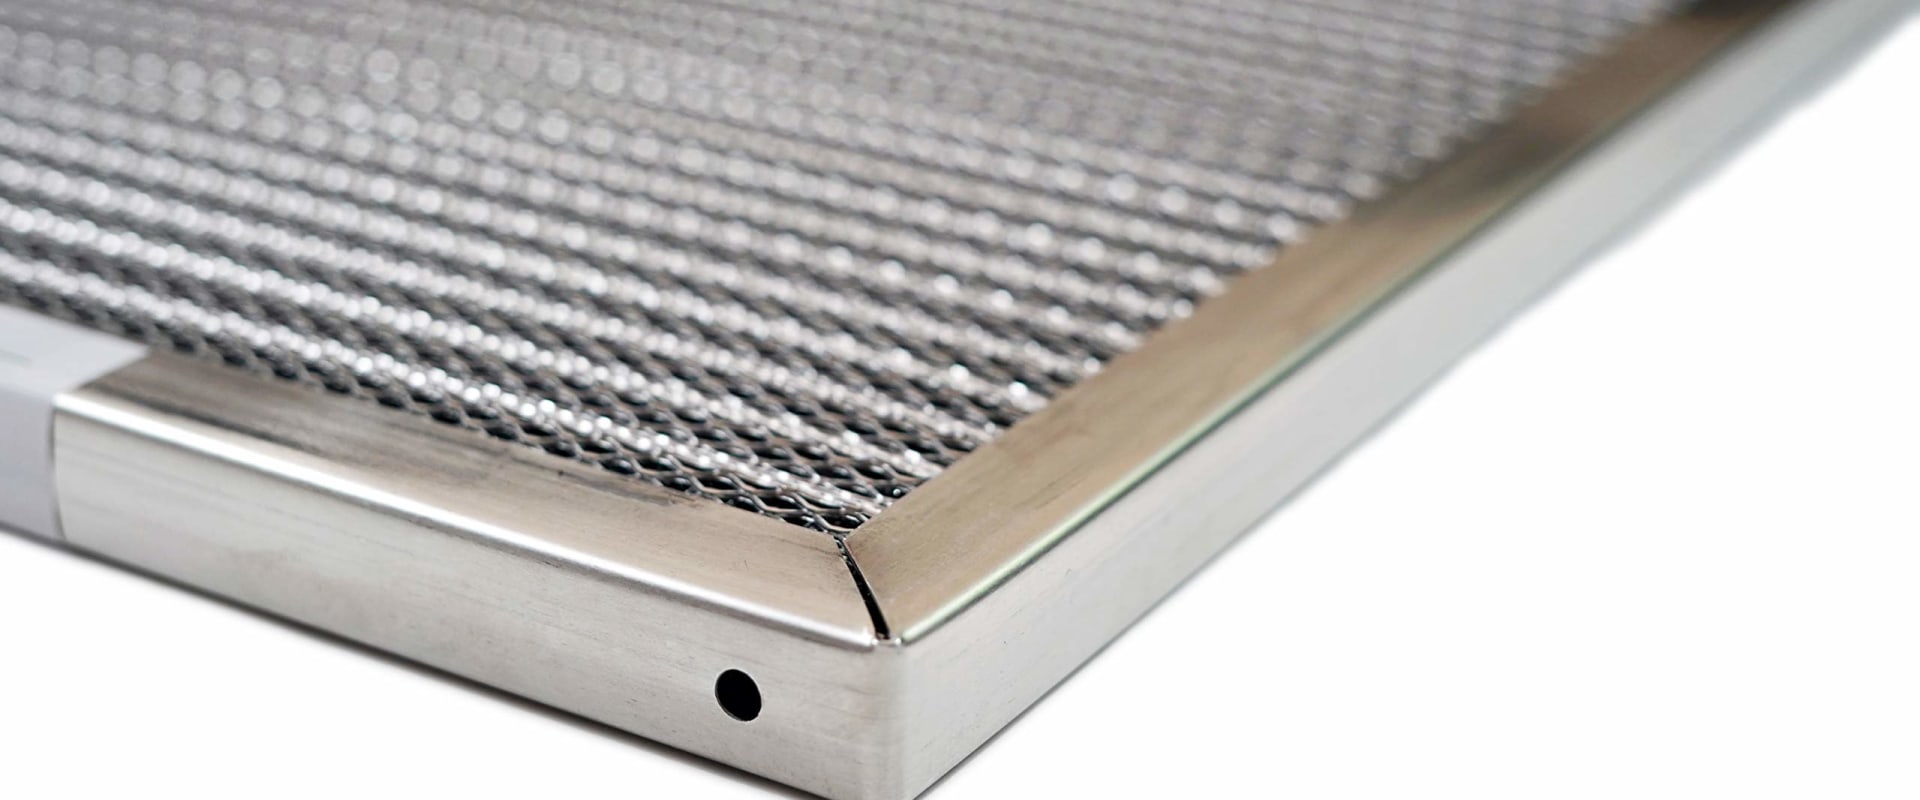 Is an Electrostatic Air Filter Worth It? - A Comprehensive Guide